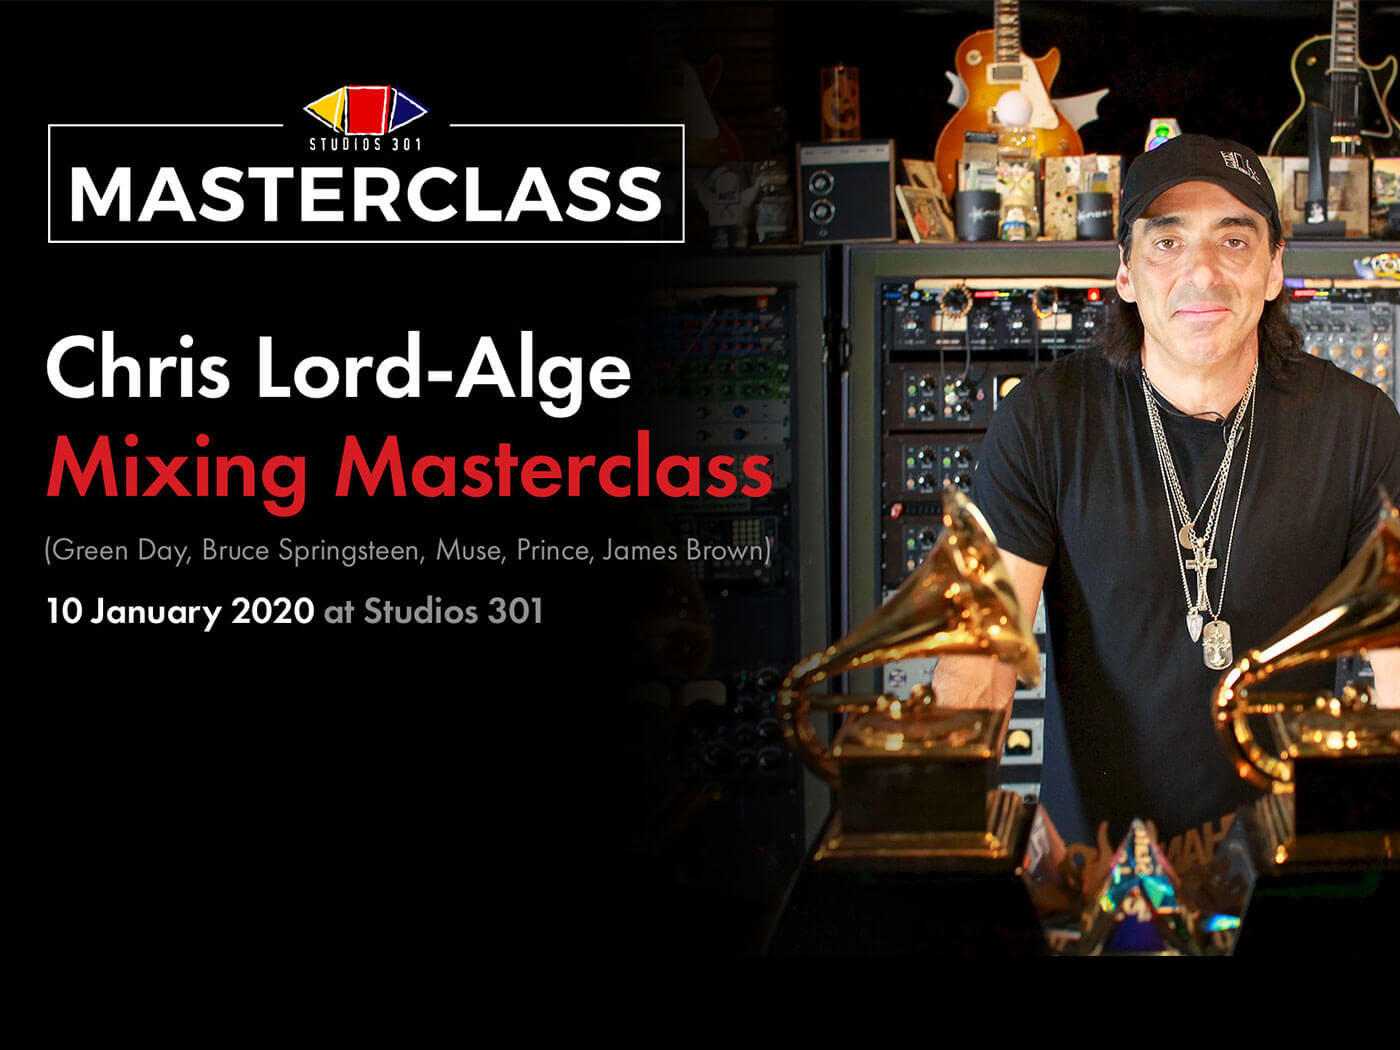 rygrad Udlænding Thorny Studios 301 is hosting a masterclass with mixing genius, Chris Lord-Alge